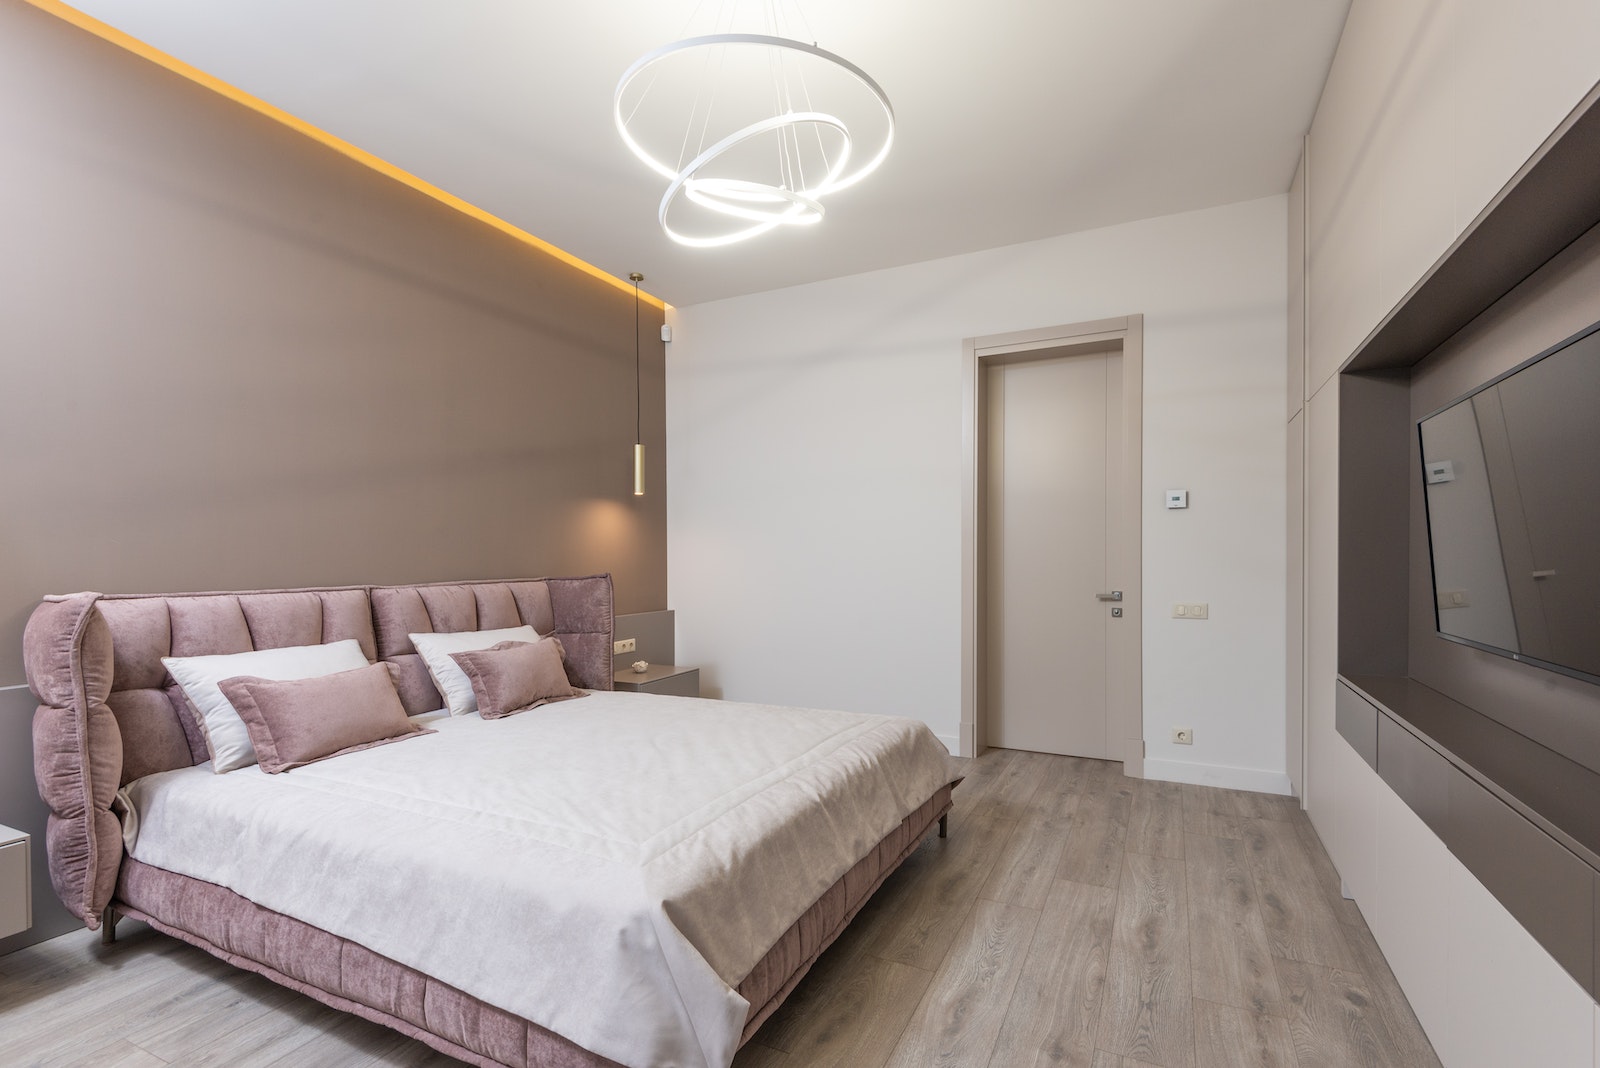 Interior design of comfortable bedroom with light brown and white painted walls furnished with bed with pink upholstery decorated with pillows Illuminated by modern chandelier